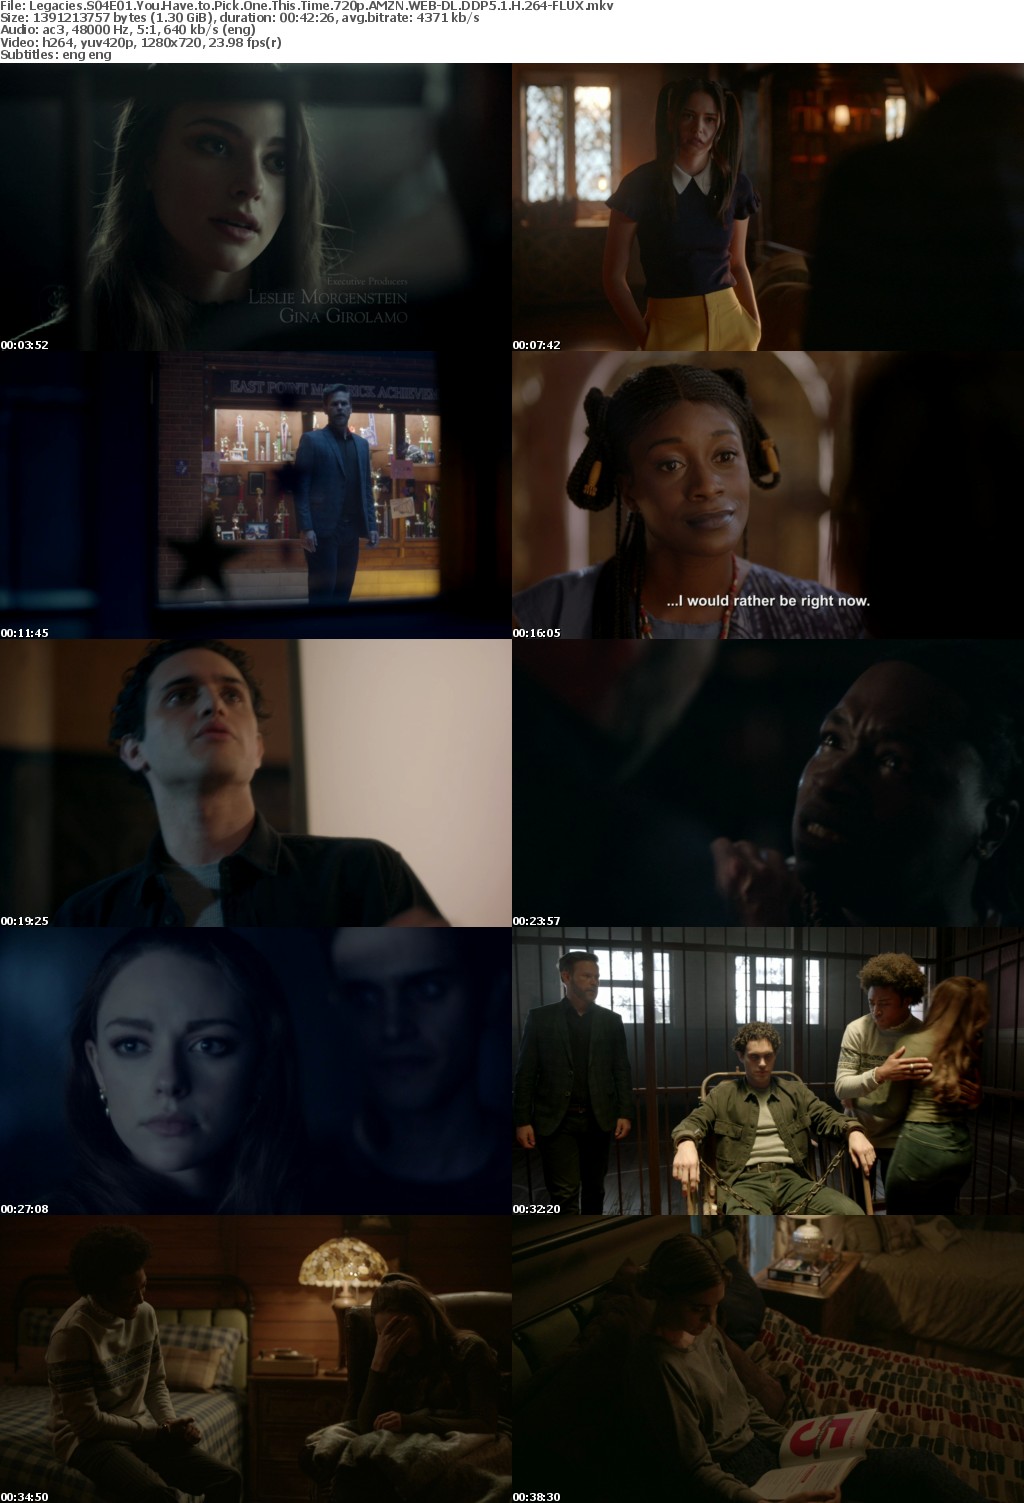 Legacies S04E01 You Have to Pick One This Time 720p AMZN WEBRip DDP5 1 x264-FLUX